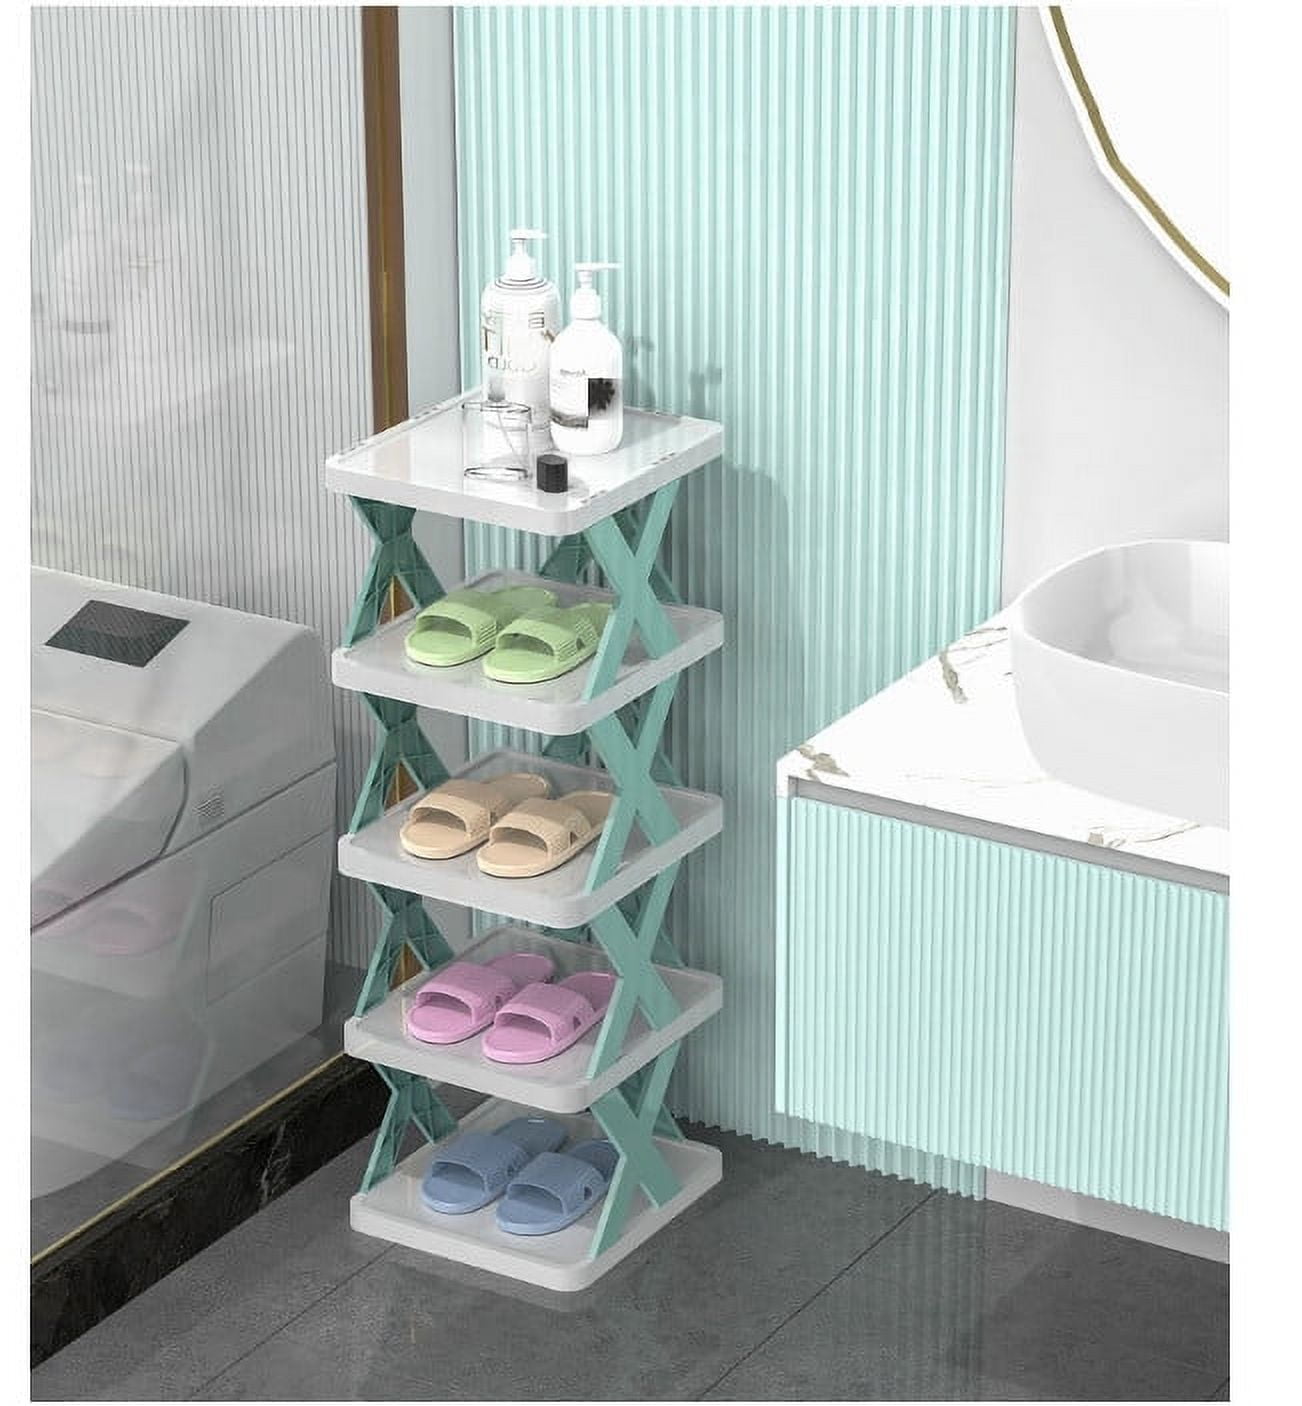 UMBFUN Shoe Rack, 9 Tiers Shoes Rack Organizer for Entryway Hold